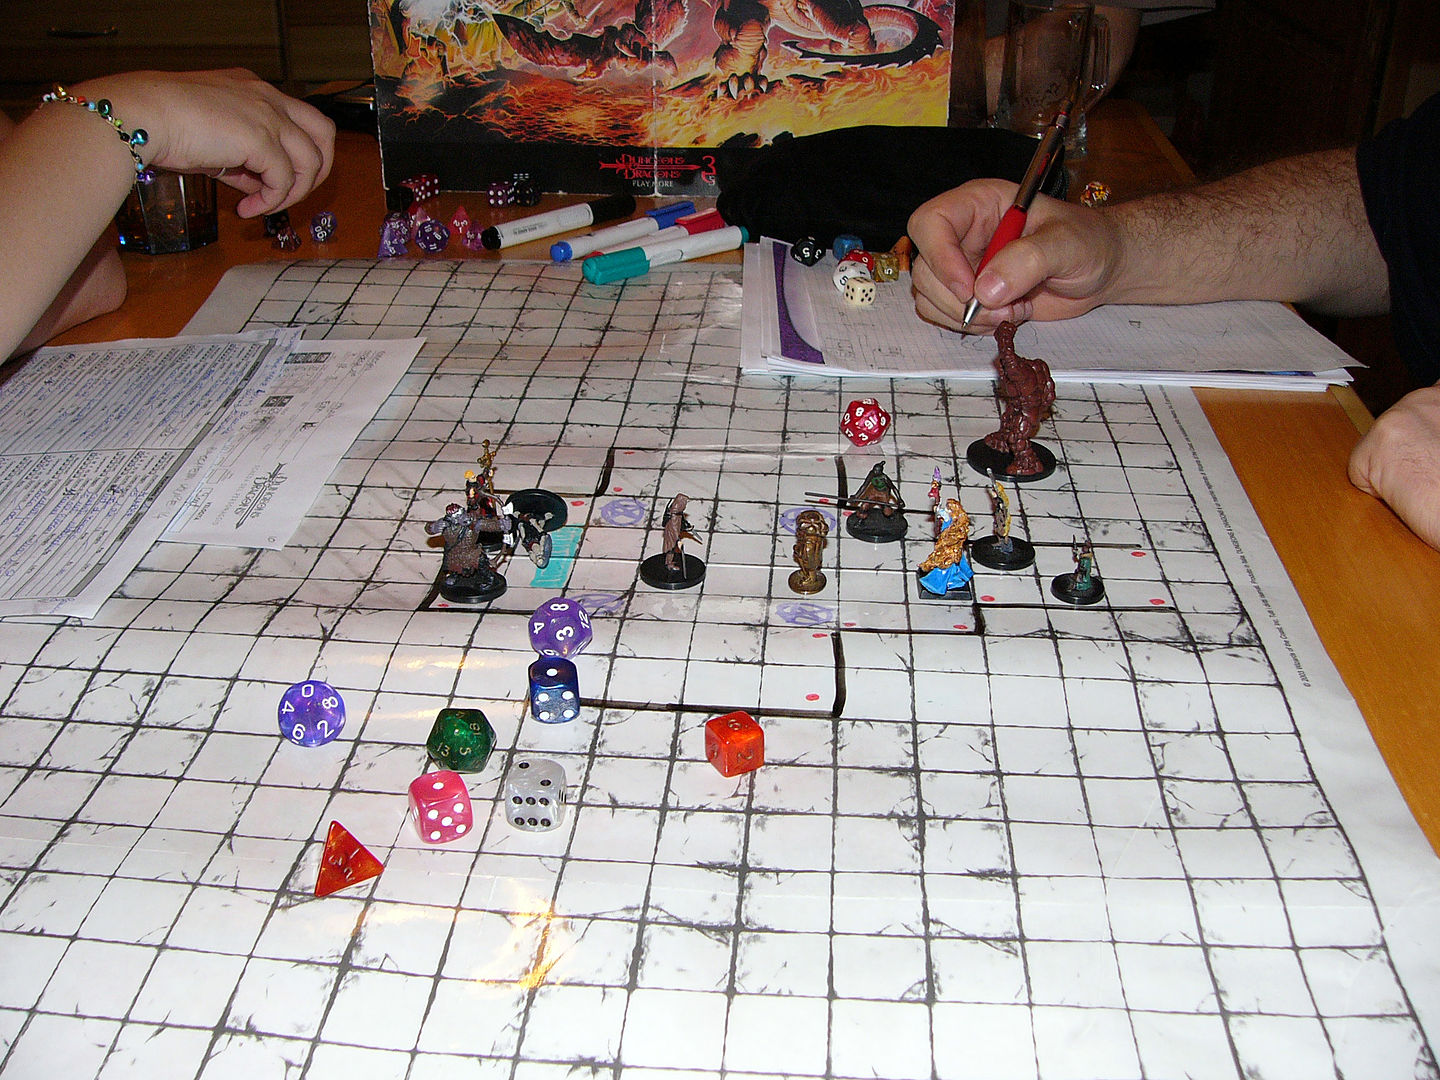 1440px-Dungeons_and_Dragons_game